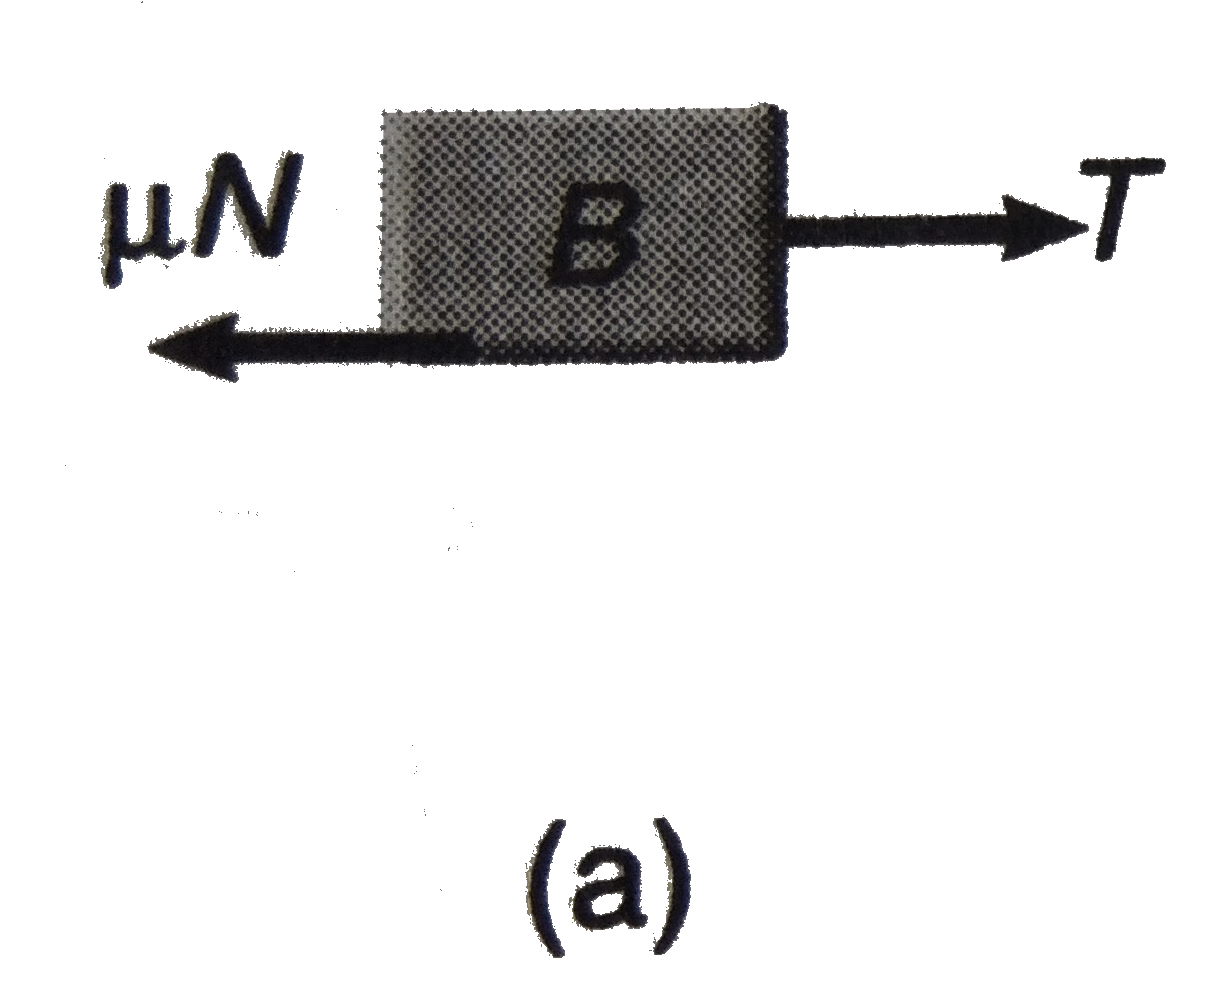 Two Blocksa Andb Are Connected To Each Other By A String And A